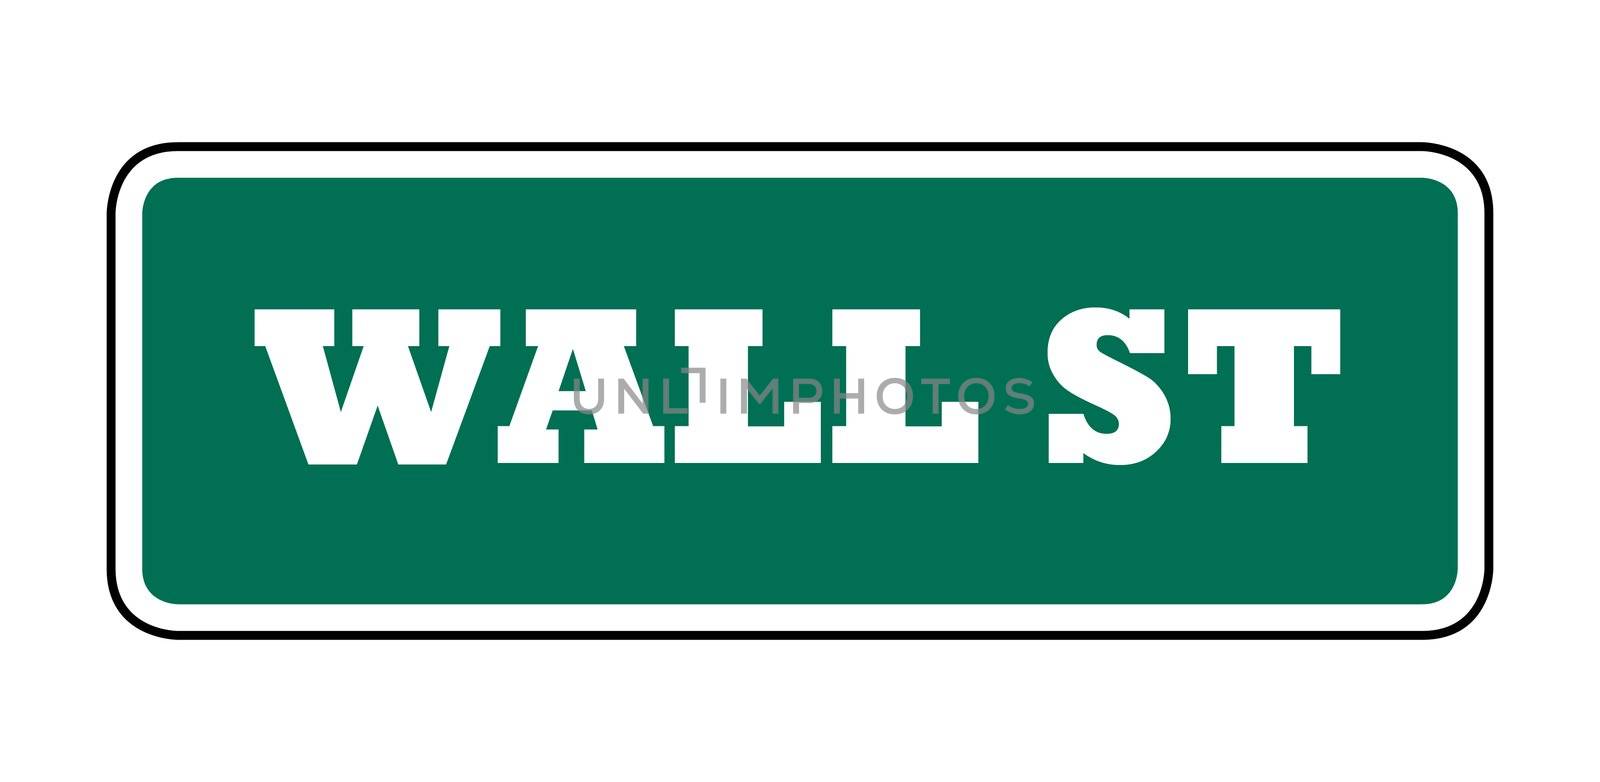 Wall street sign by speedfighter